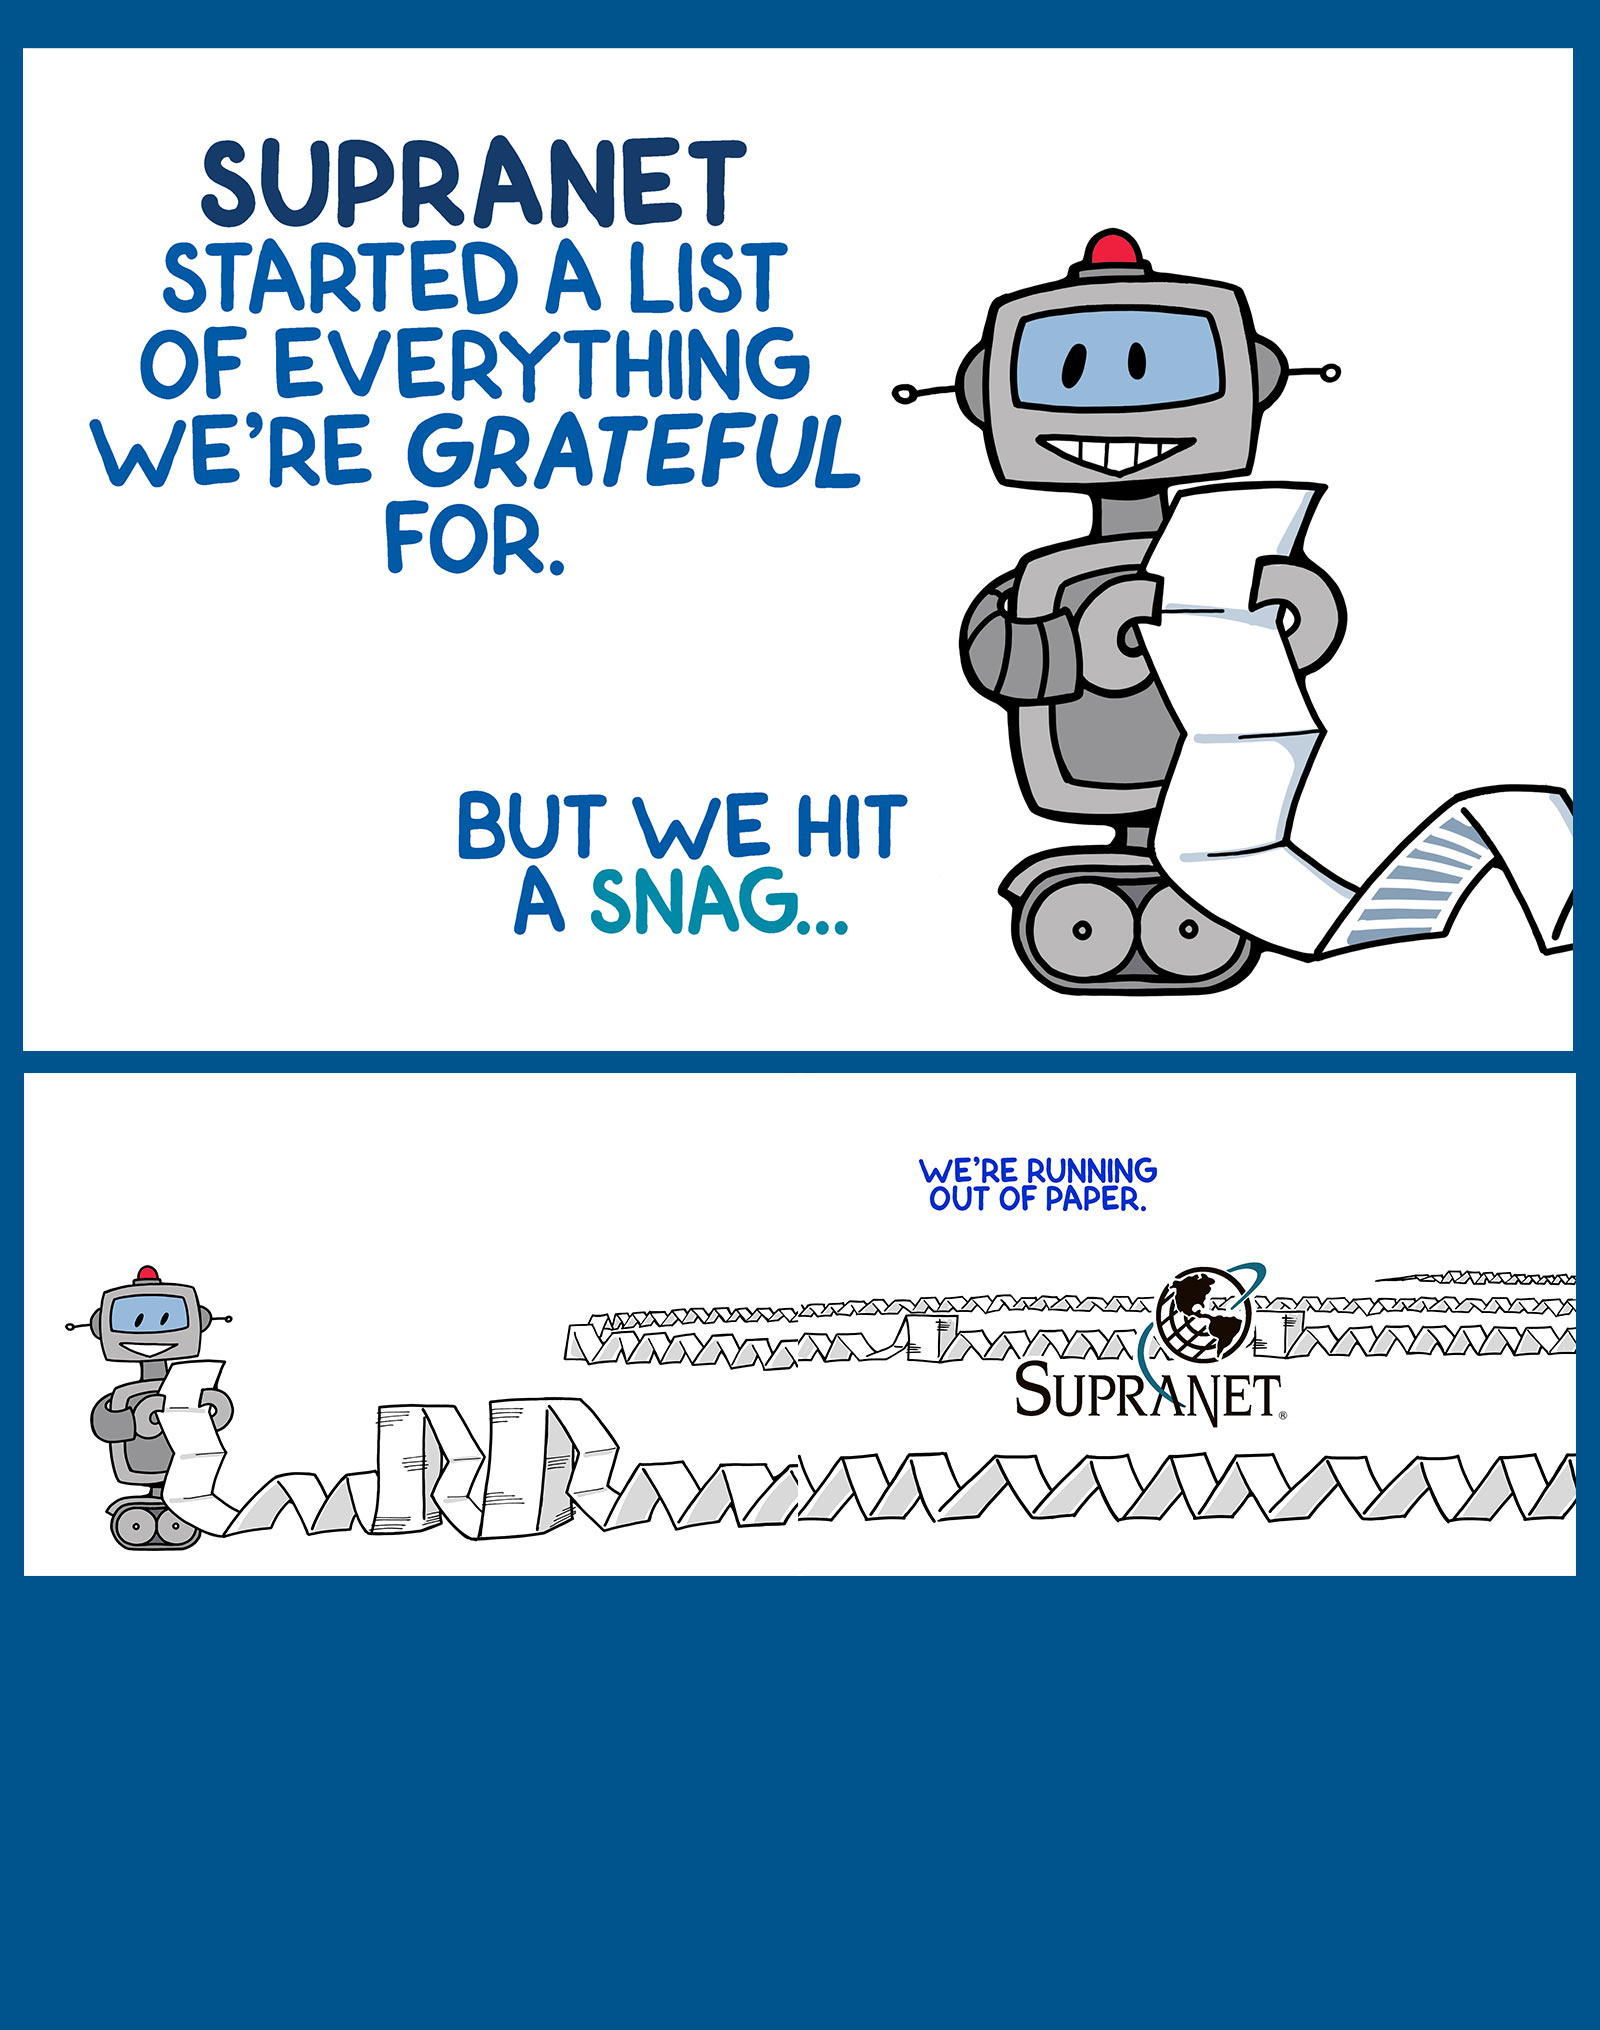 SupraNet Greeting card with robot saying "SupraNet started a list of everything we're grateful for. But we hit a SNAG. We're running out of paper.